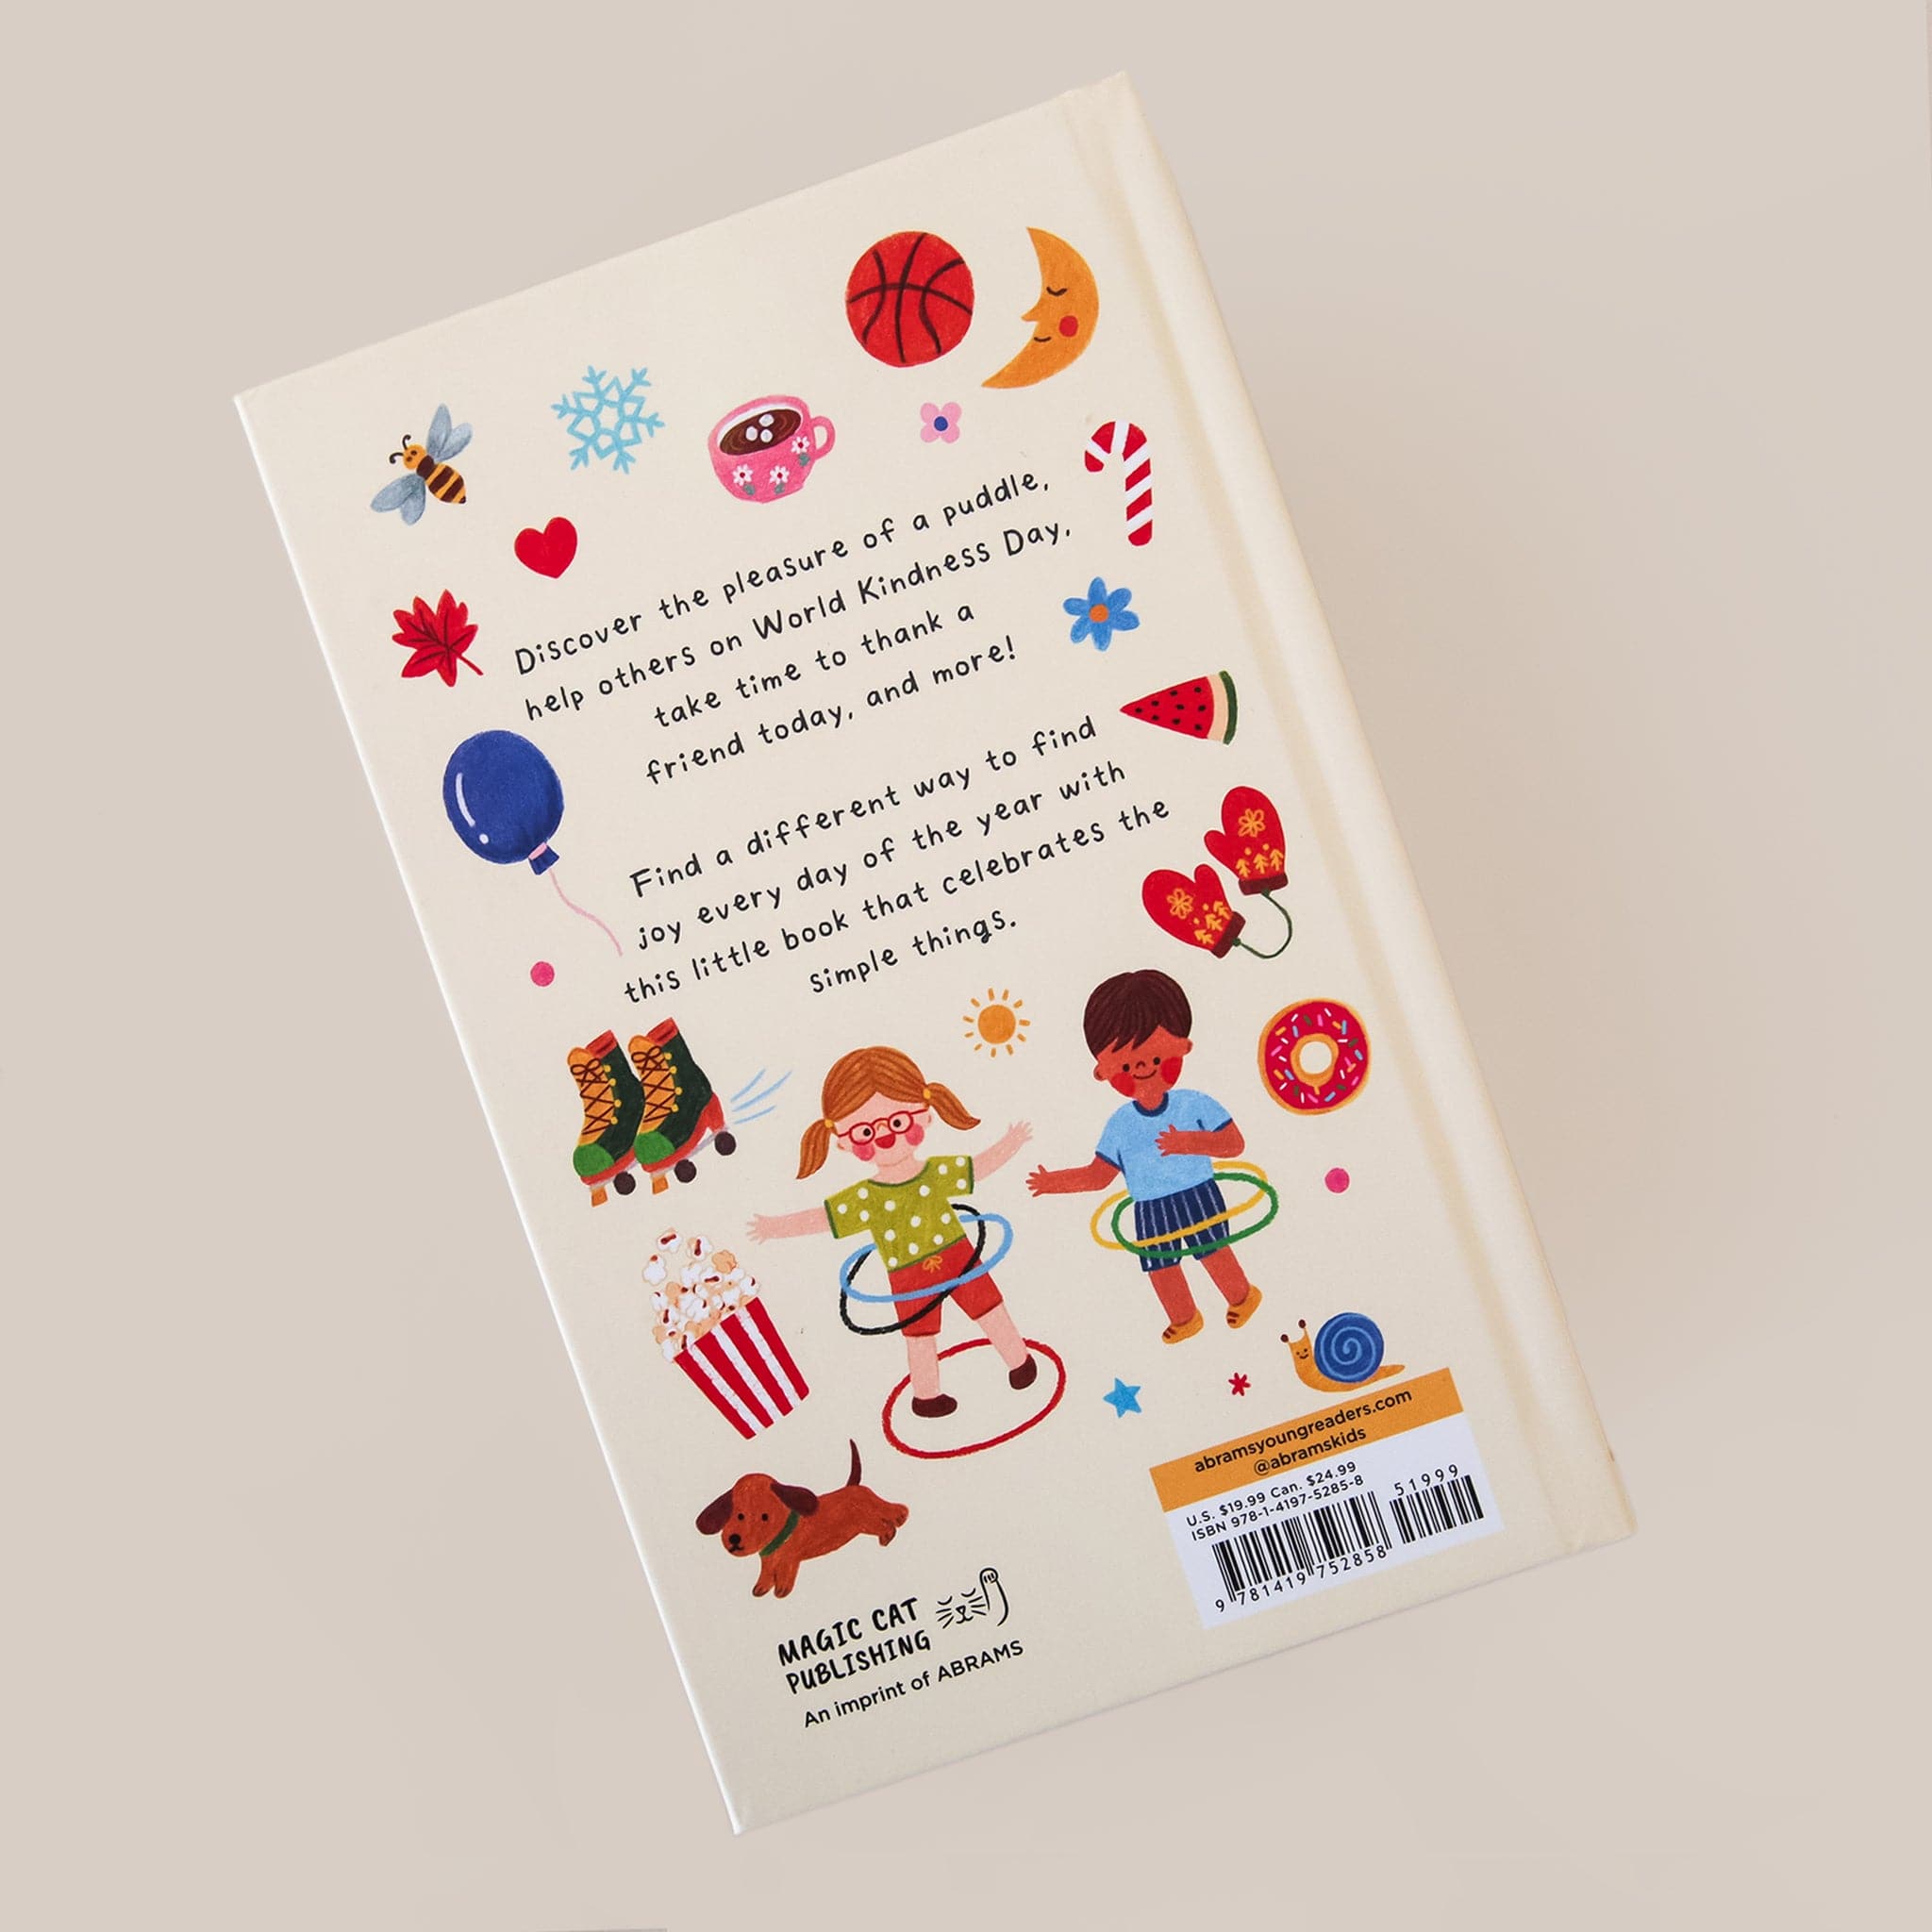 The back of the book that features more colorful illustrations. There is a bee, roller-skates, a balloon, a piece of watermelon, mittens, a cup of hot chocolate, a basketball, the moon, a candy cane, a snowflake, and a donut. Also pictured are two children playing with hula hoops. There is text in the center that reads, &quot;Find a different way to find joy in every day of the year with this little book that celebrates the simple things.&quot;.